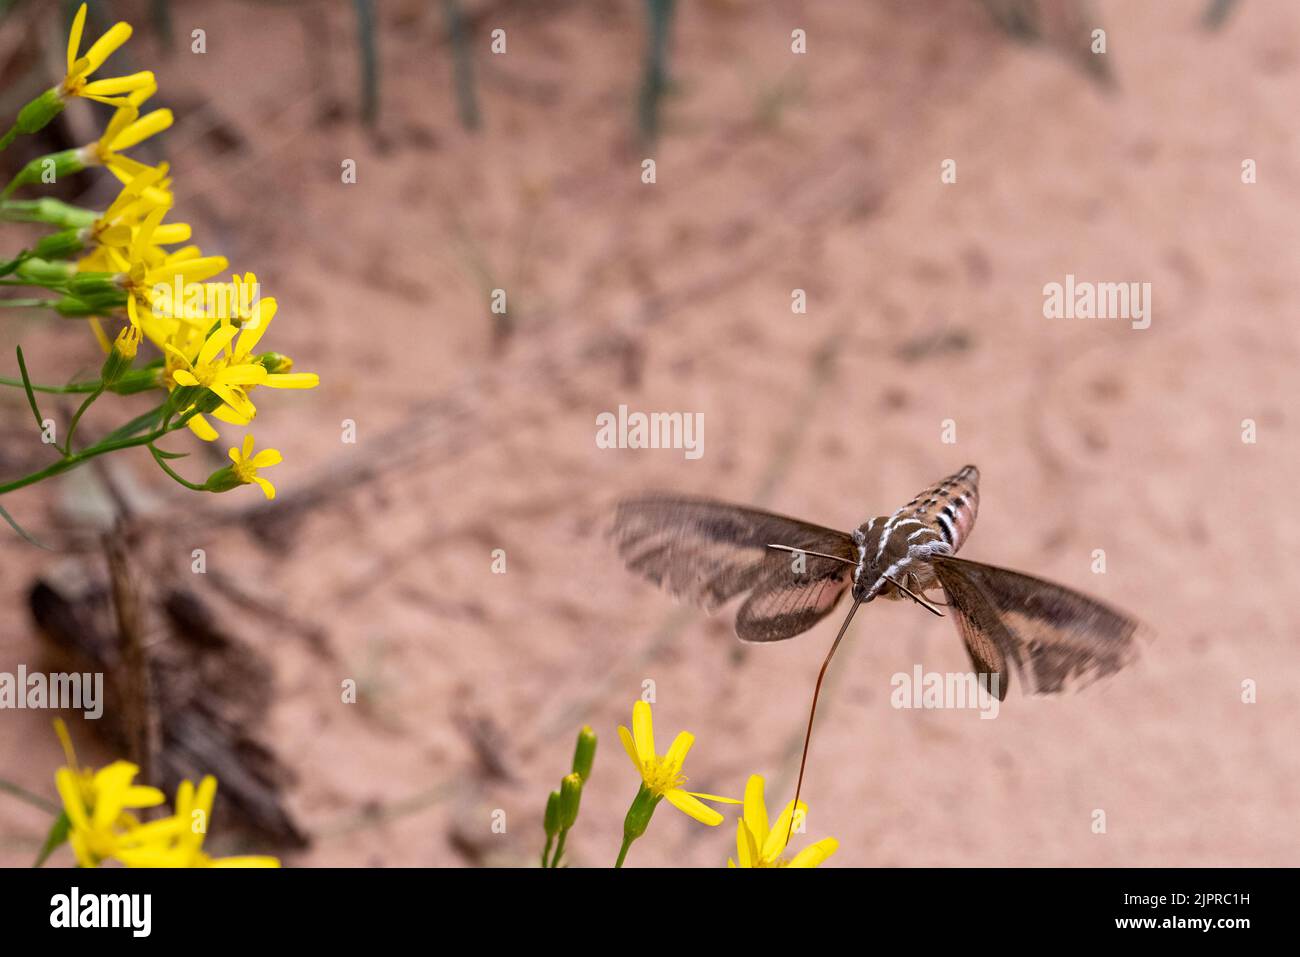 White-lined sphinx moth (Hyles lineata), Canyonlands National Park, Utah. Stock Photo